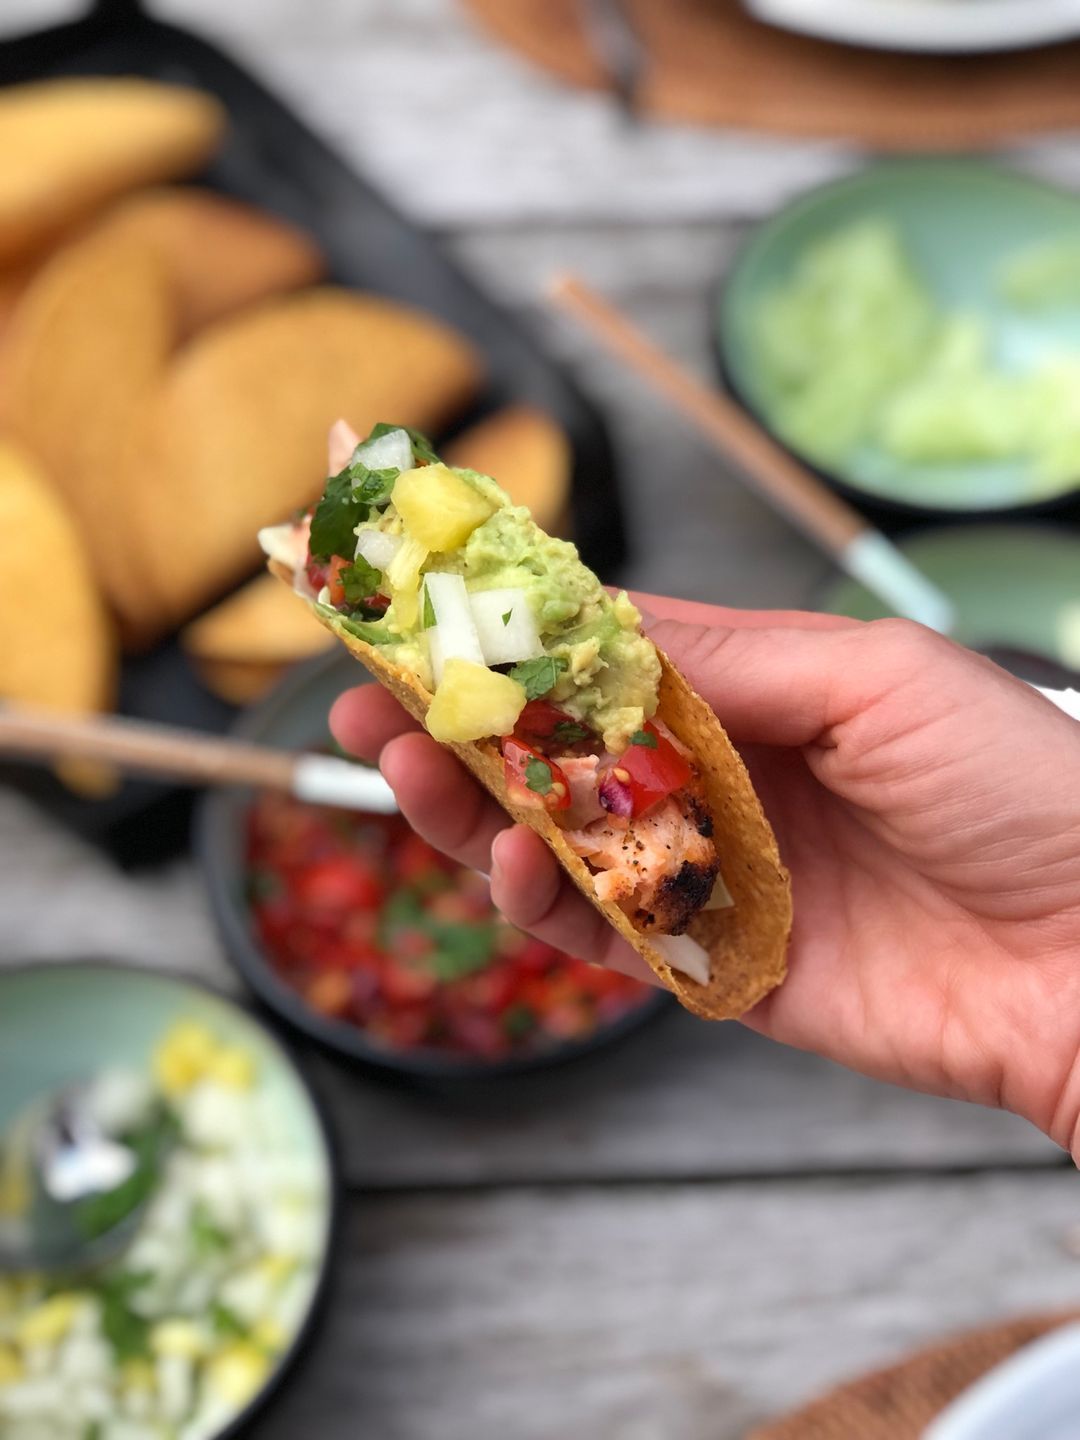 Salmon tacos with pico de gallo and pineapple and melon salsa